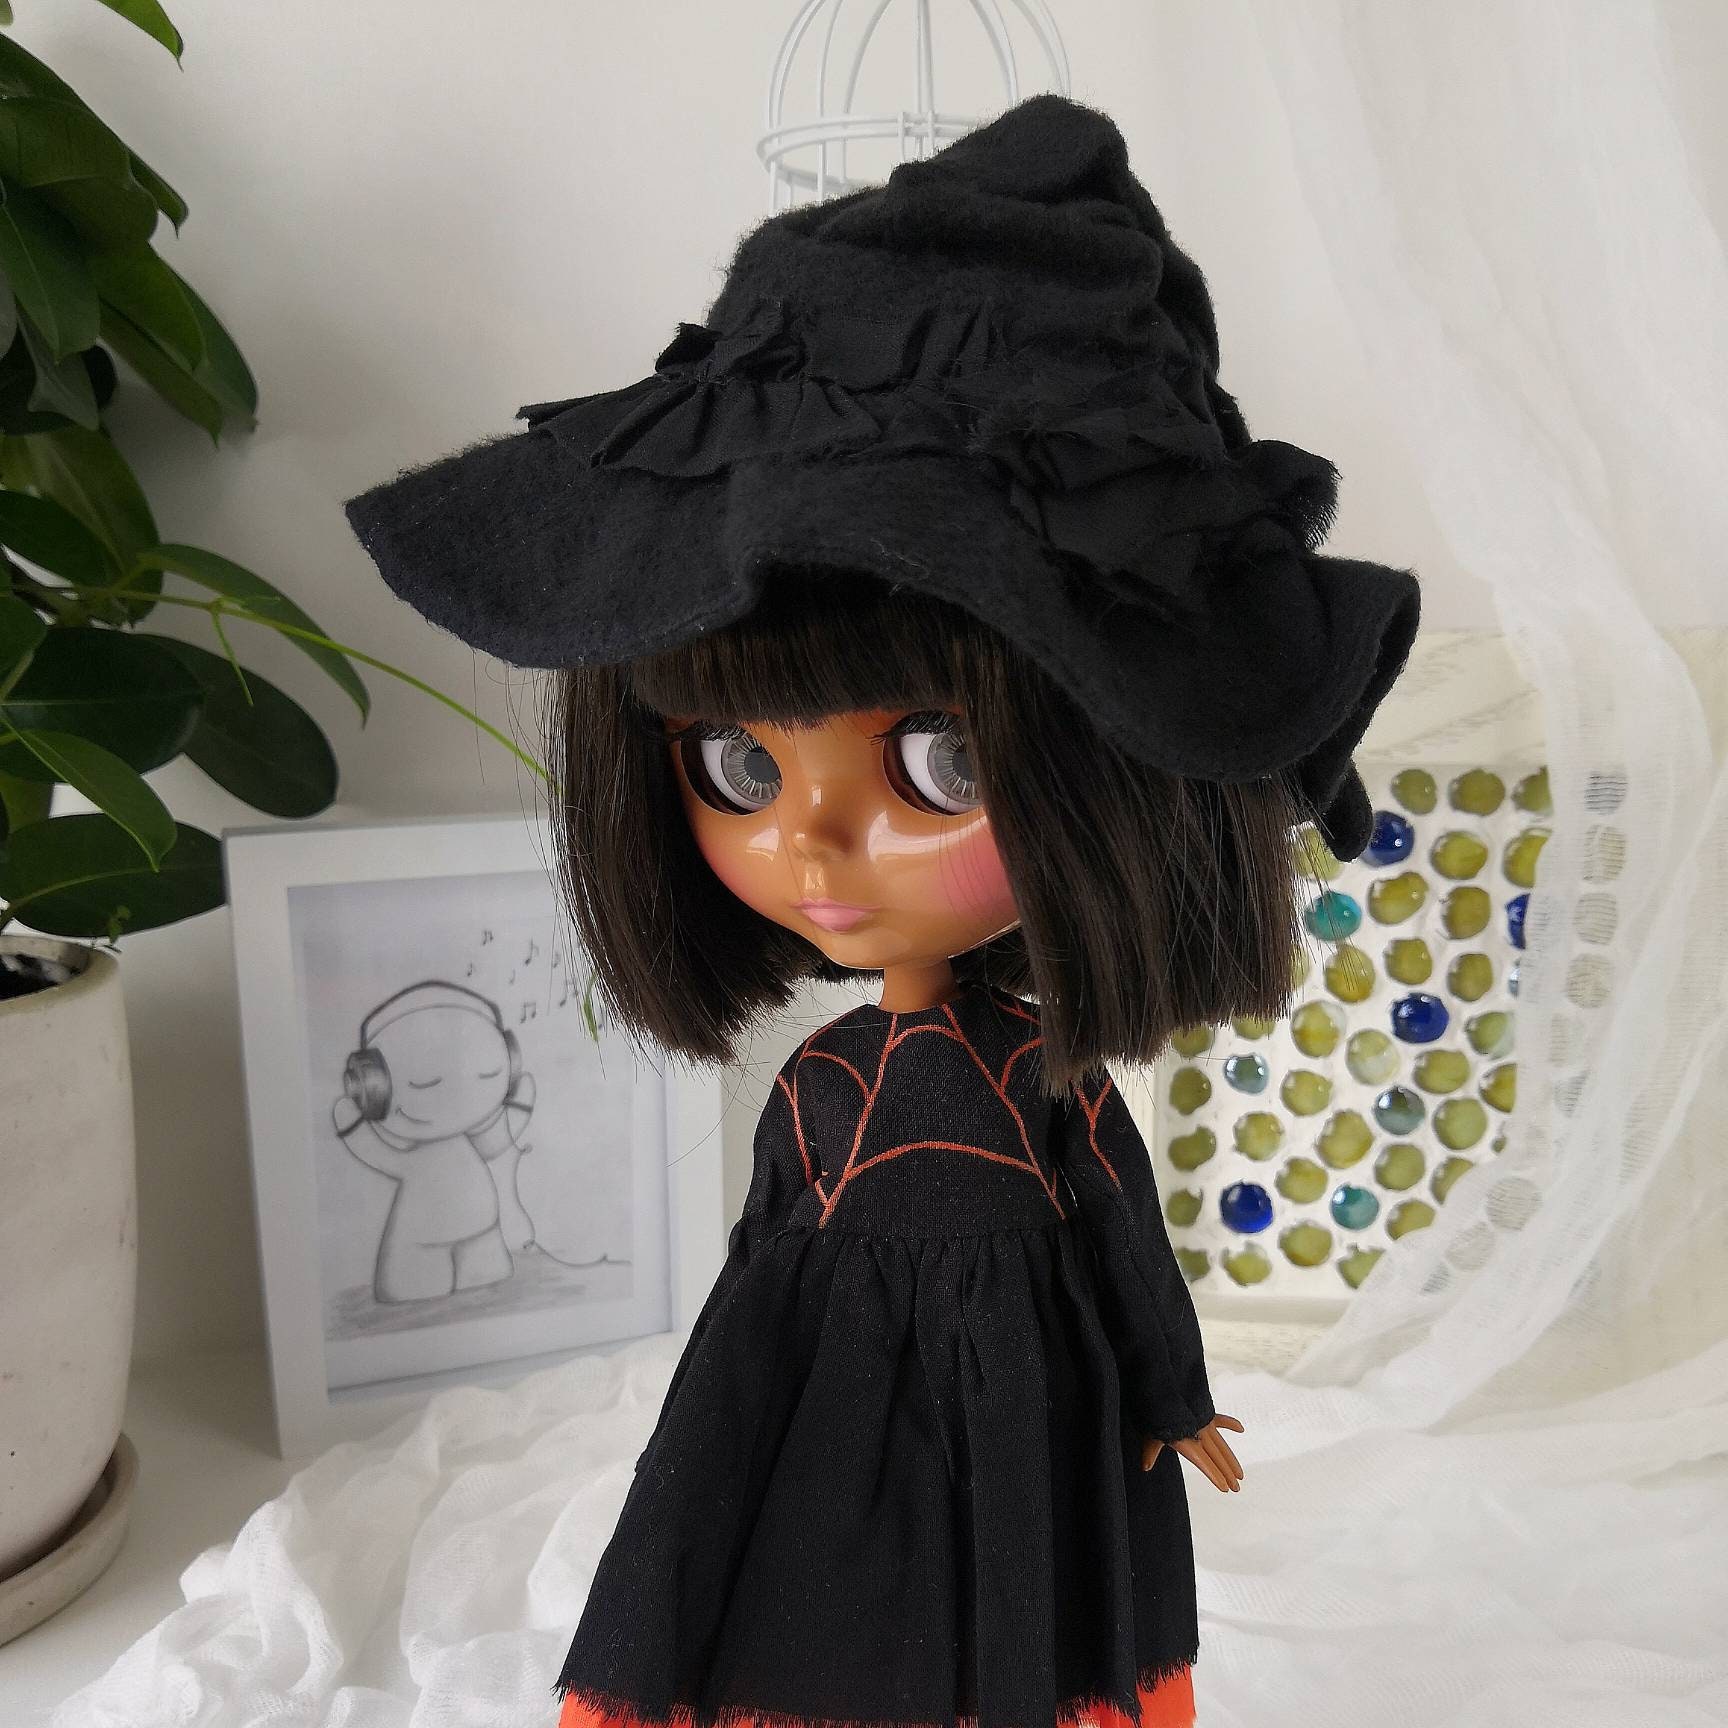 Halloween blythe doll outfit. 1 new set clothes Blythe doll